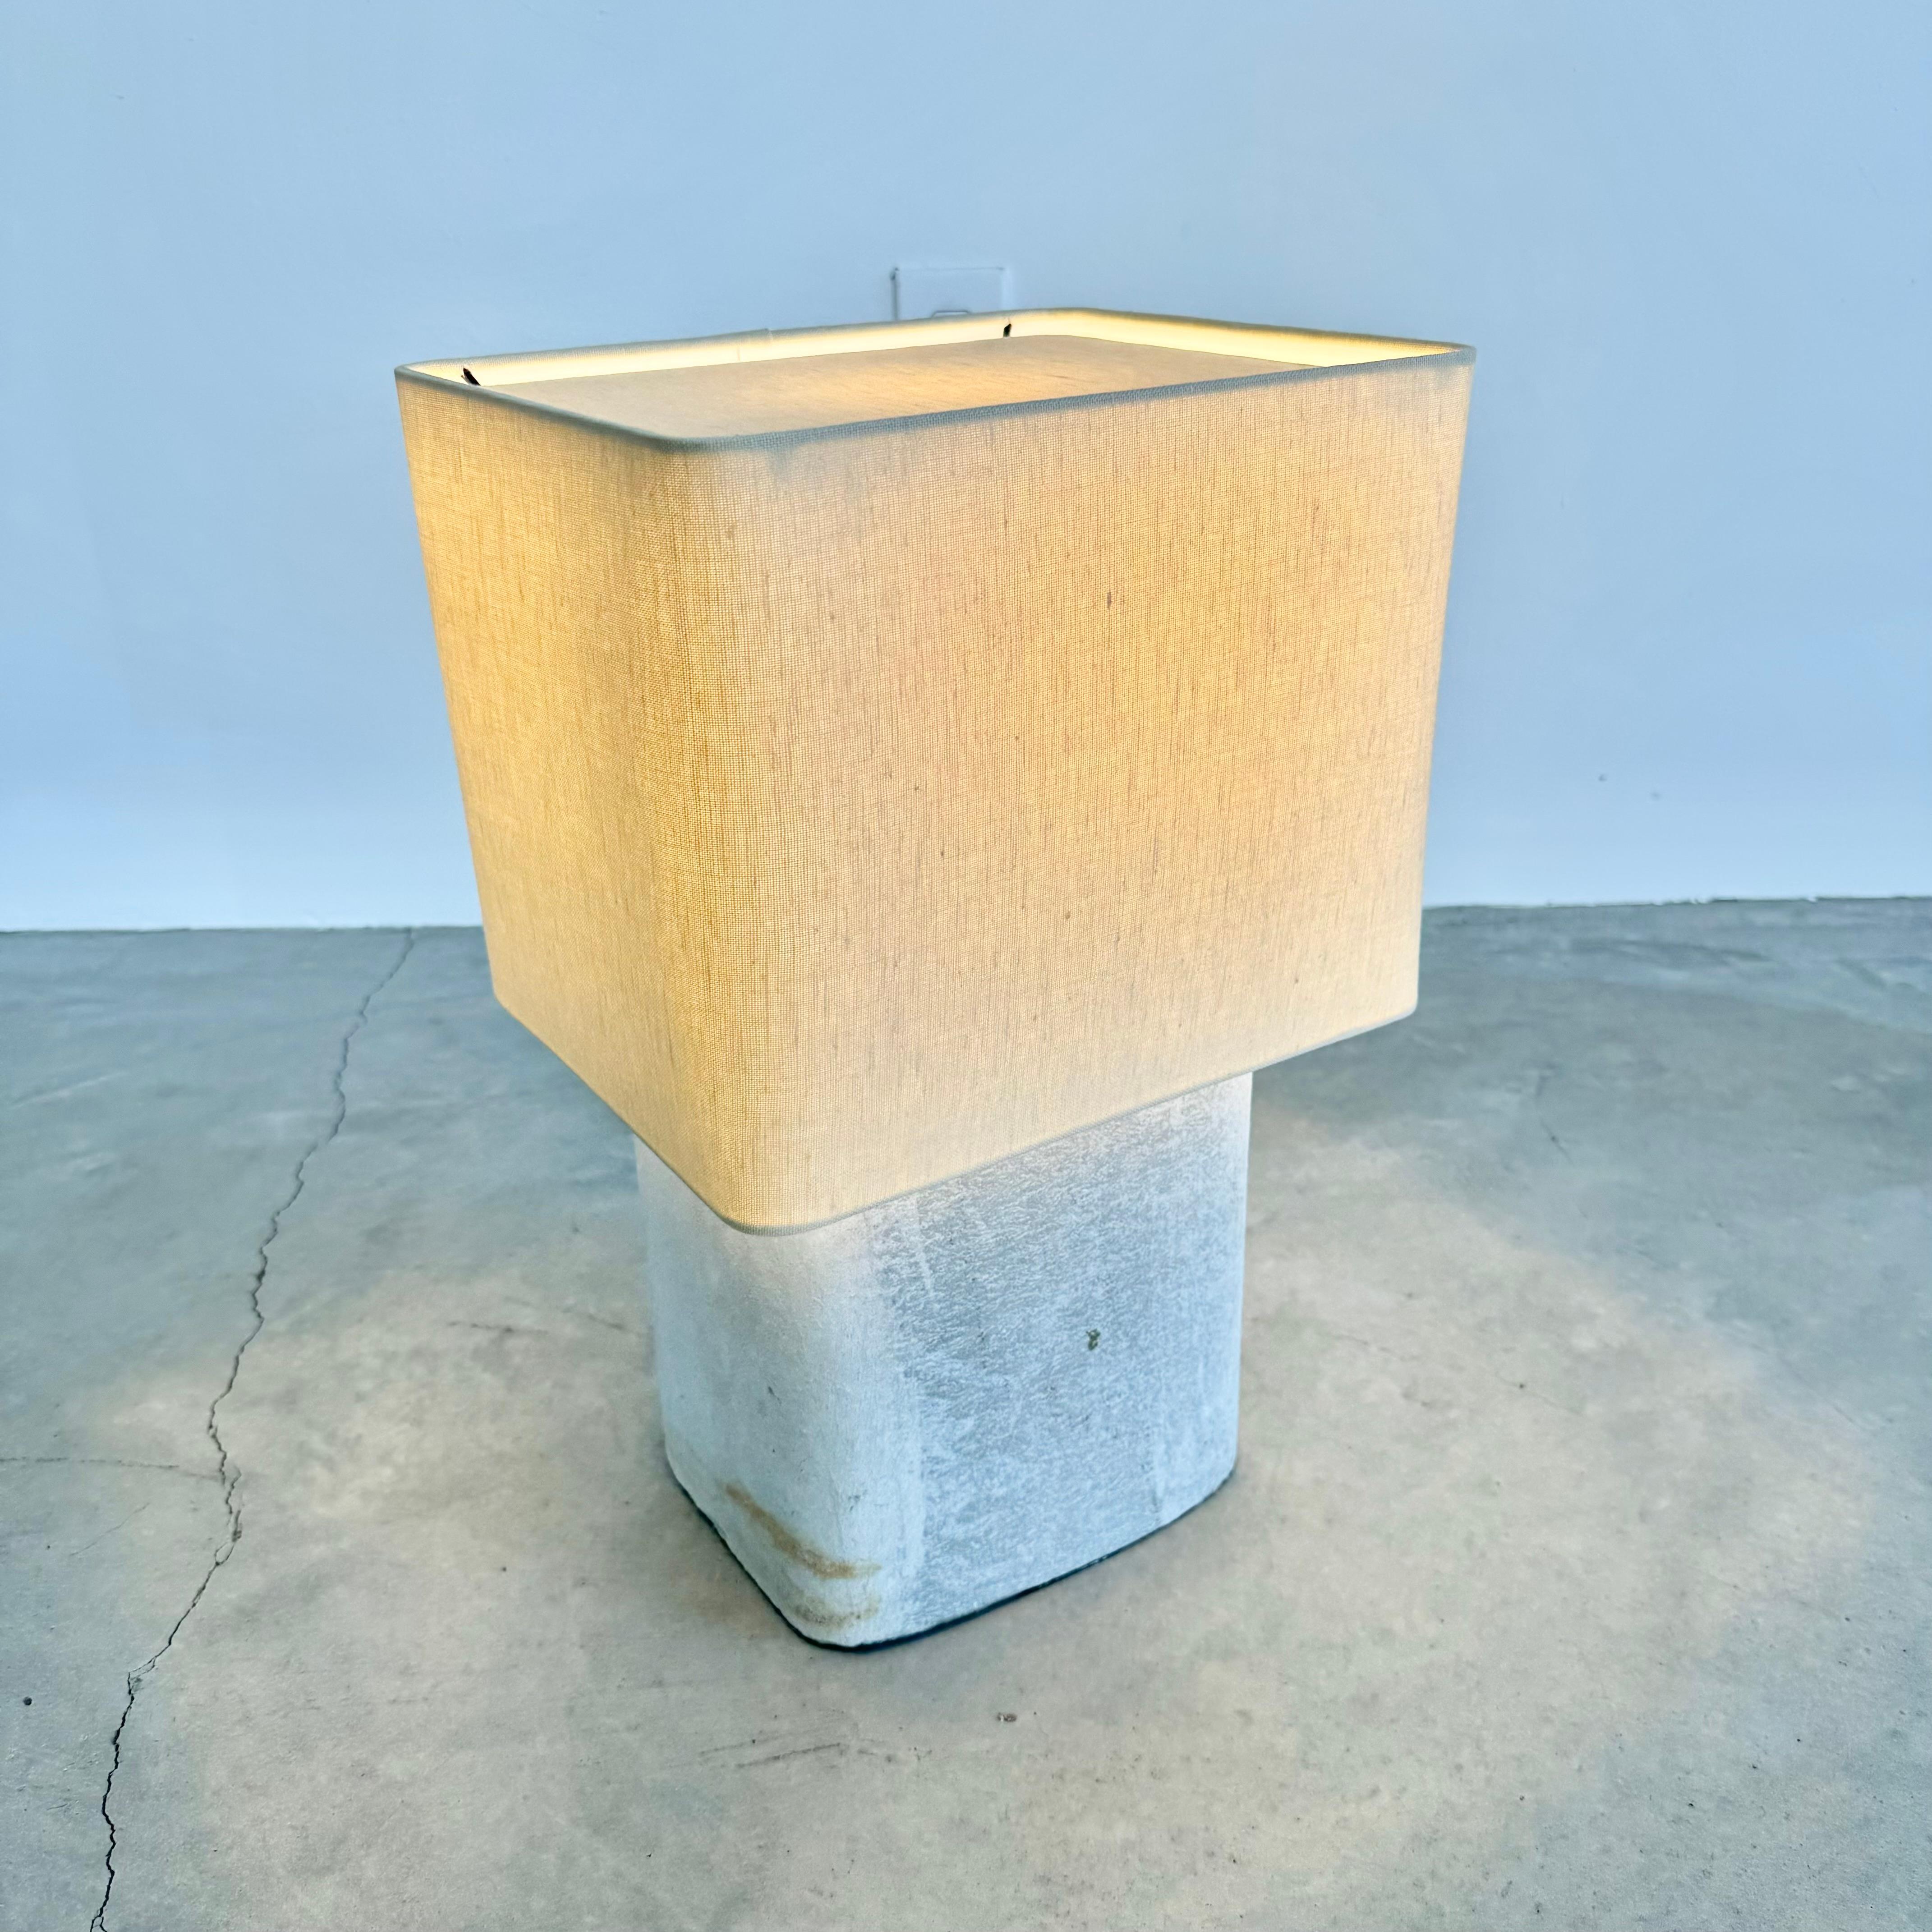 Stunning concrete Willy Guhl lamp by Eternit with teak top cover. Concrete made in Swizterland. Newly fitted as a lamp, re-wired with a new custom linen shade with rounded edges and light diffusor on top. Stunning simplicity and beautiful texture